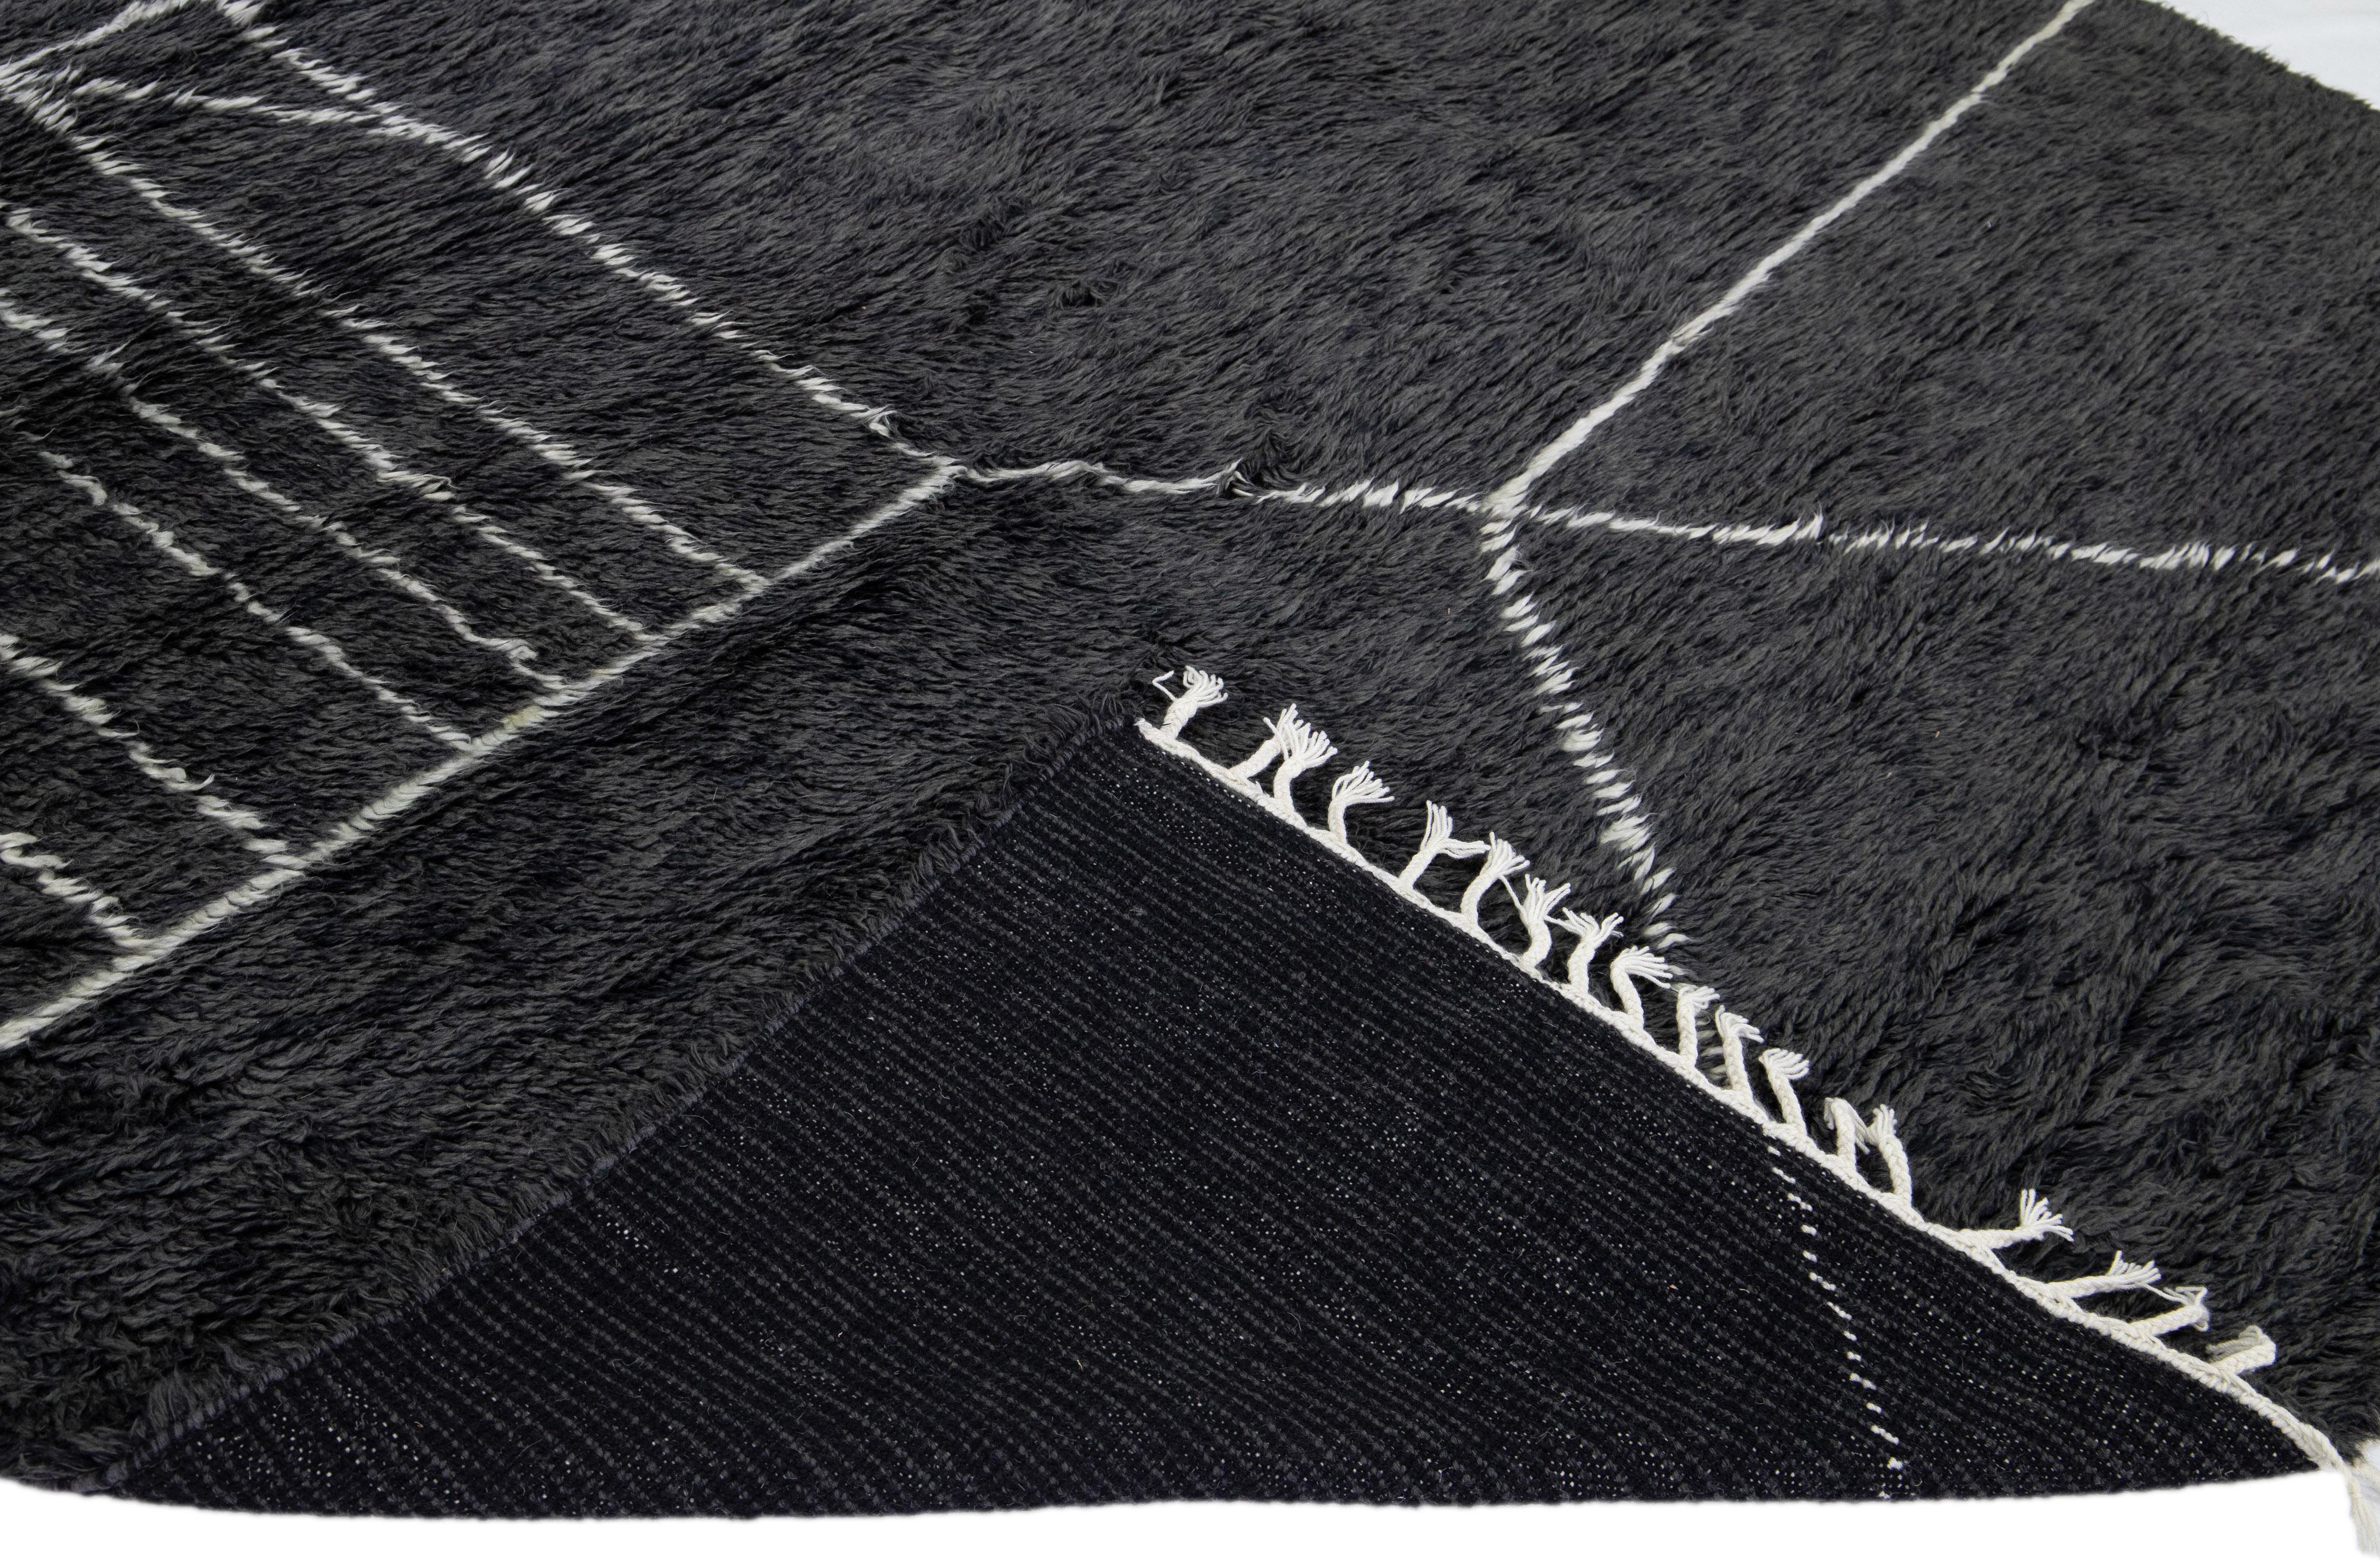 Beautiful modern Moroccan style hand-knotted wool rug with a black field and white fringes in a gorgeous geometric abstract high pile design.

This rug measures: 9'4'' x 12'.

Our rugs are professional cleaning before shipping.